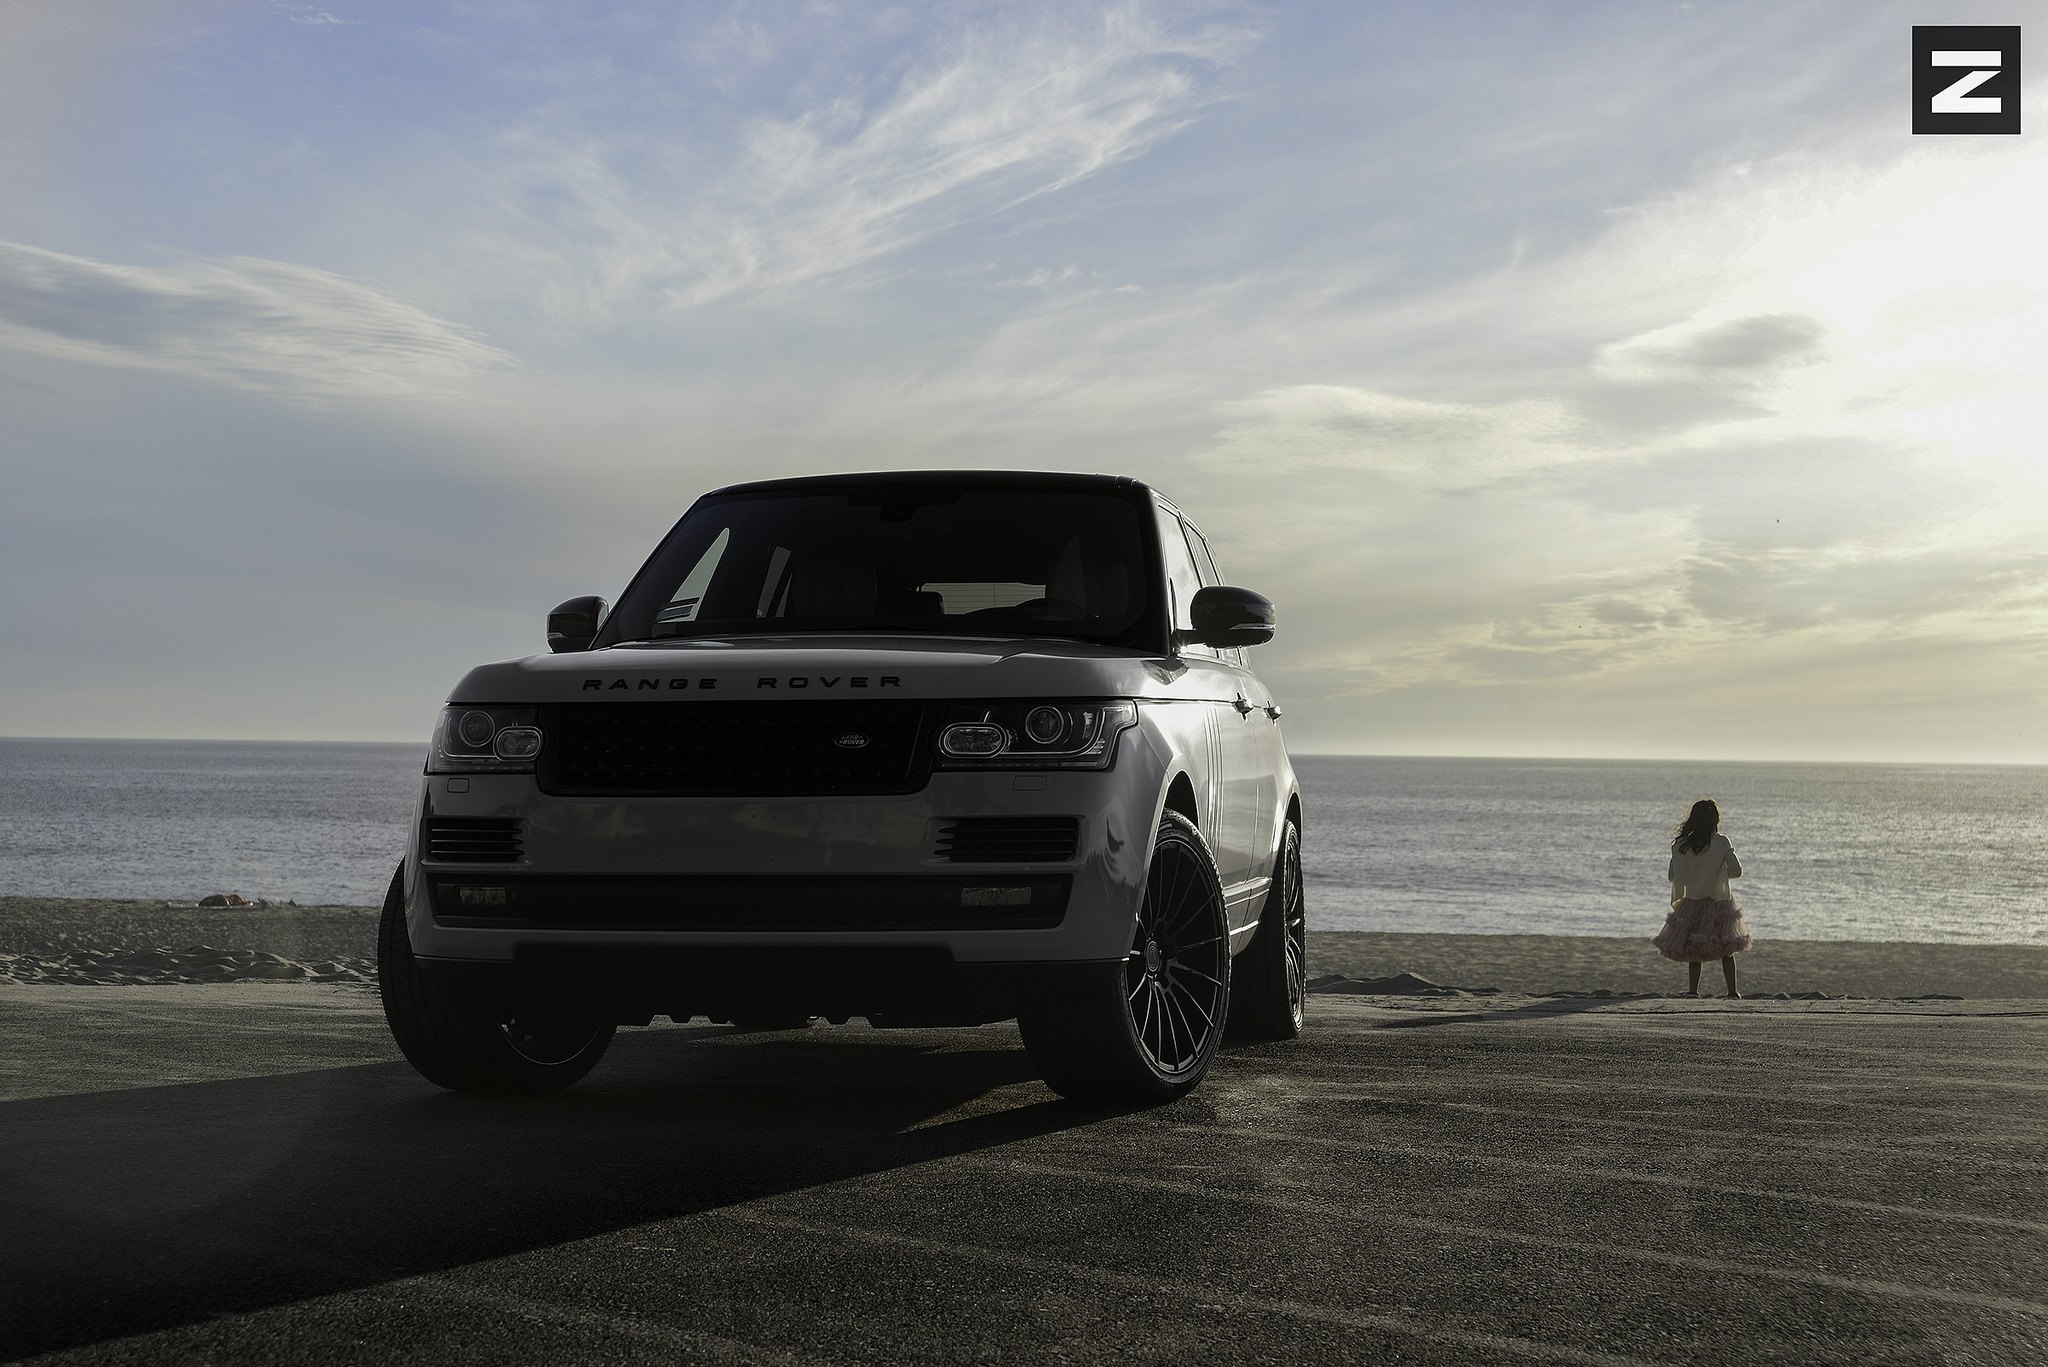 White Range Rover with Blacked Out Mesh Grille - Photo by Zito Wheels